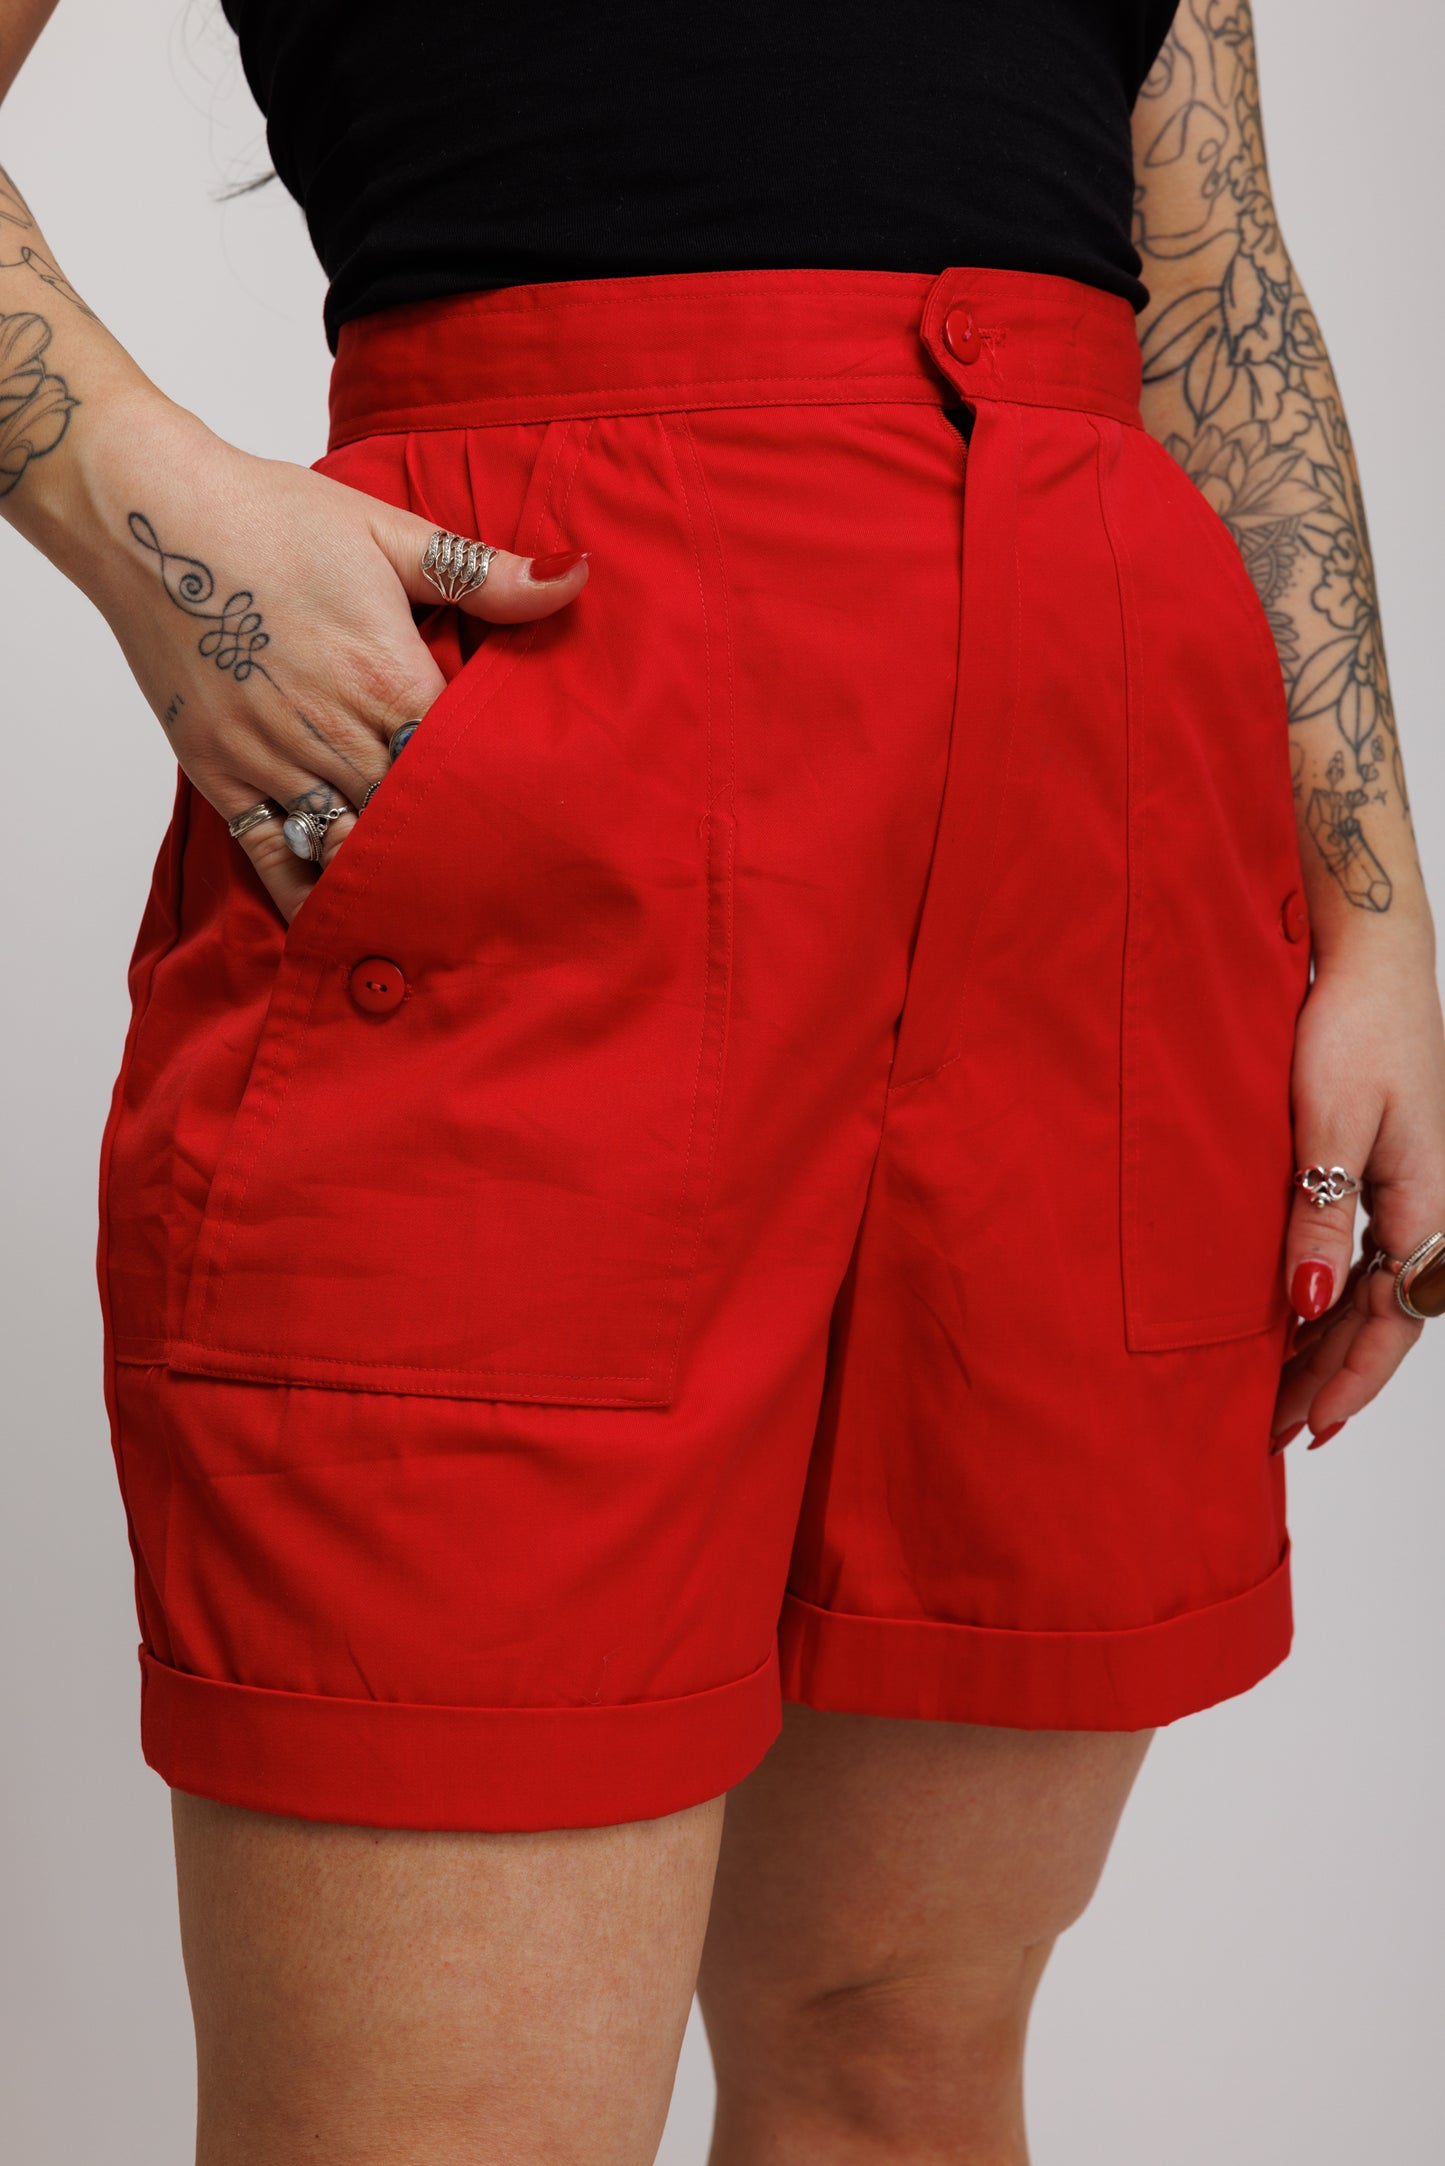 90’s Canvas Scout style shorts S/M